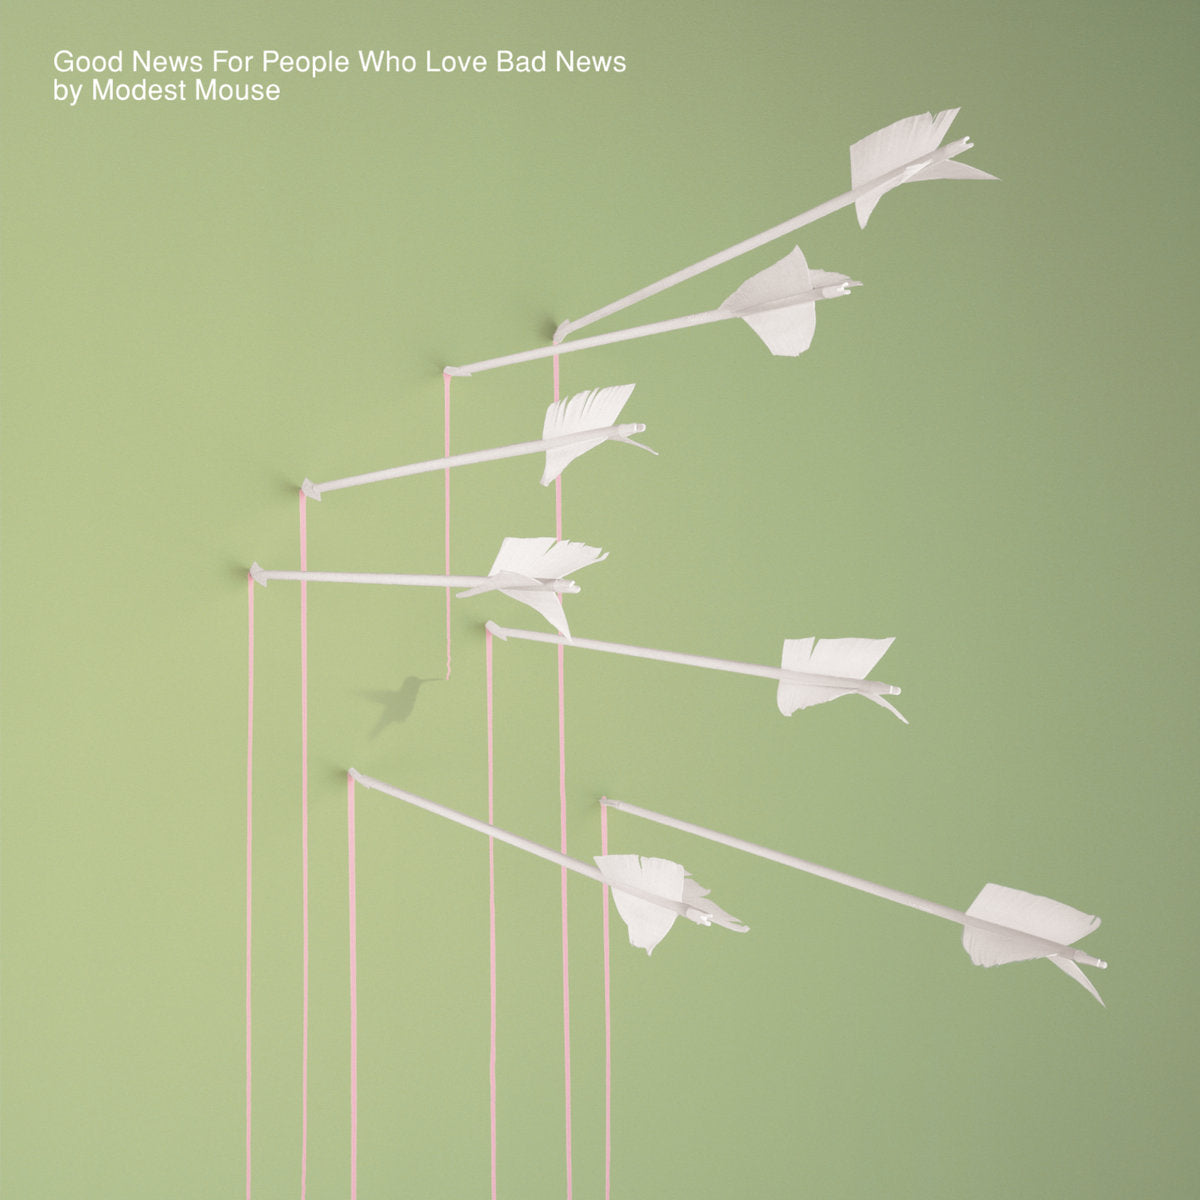 Modest Mouse "Good News for People Who Love Bad News"